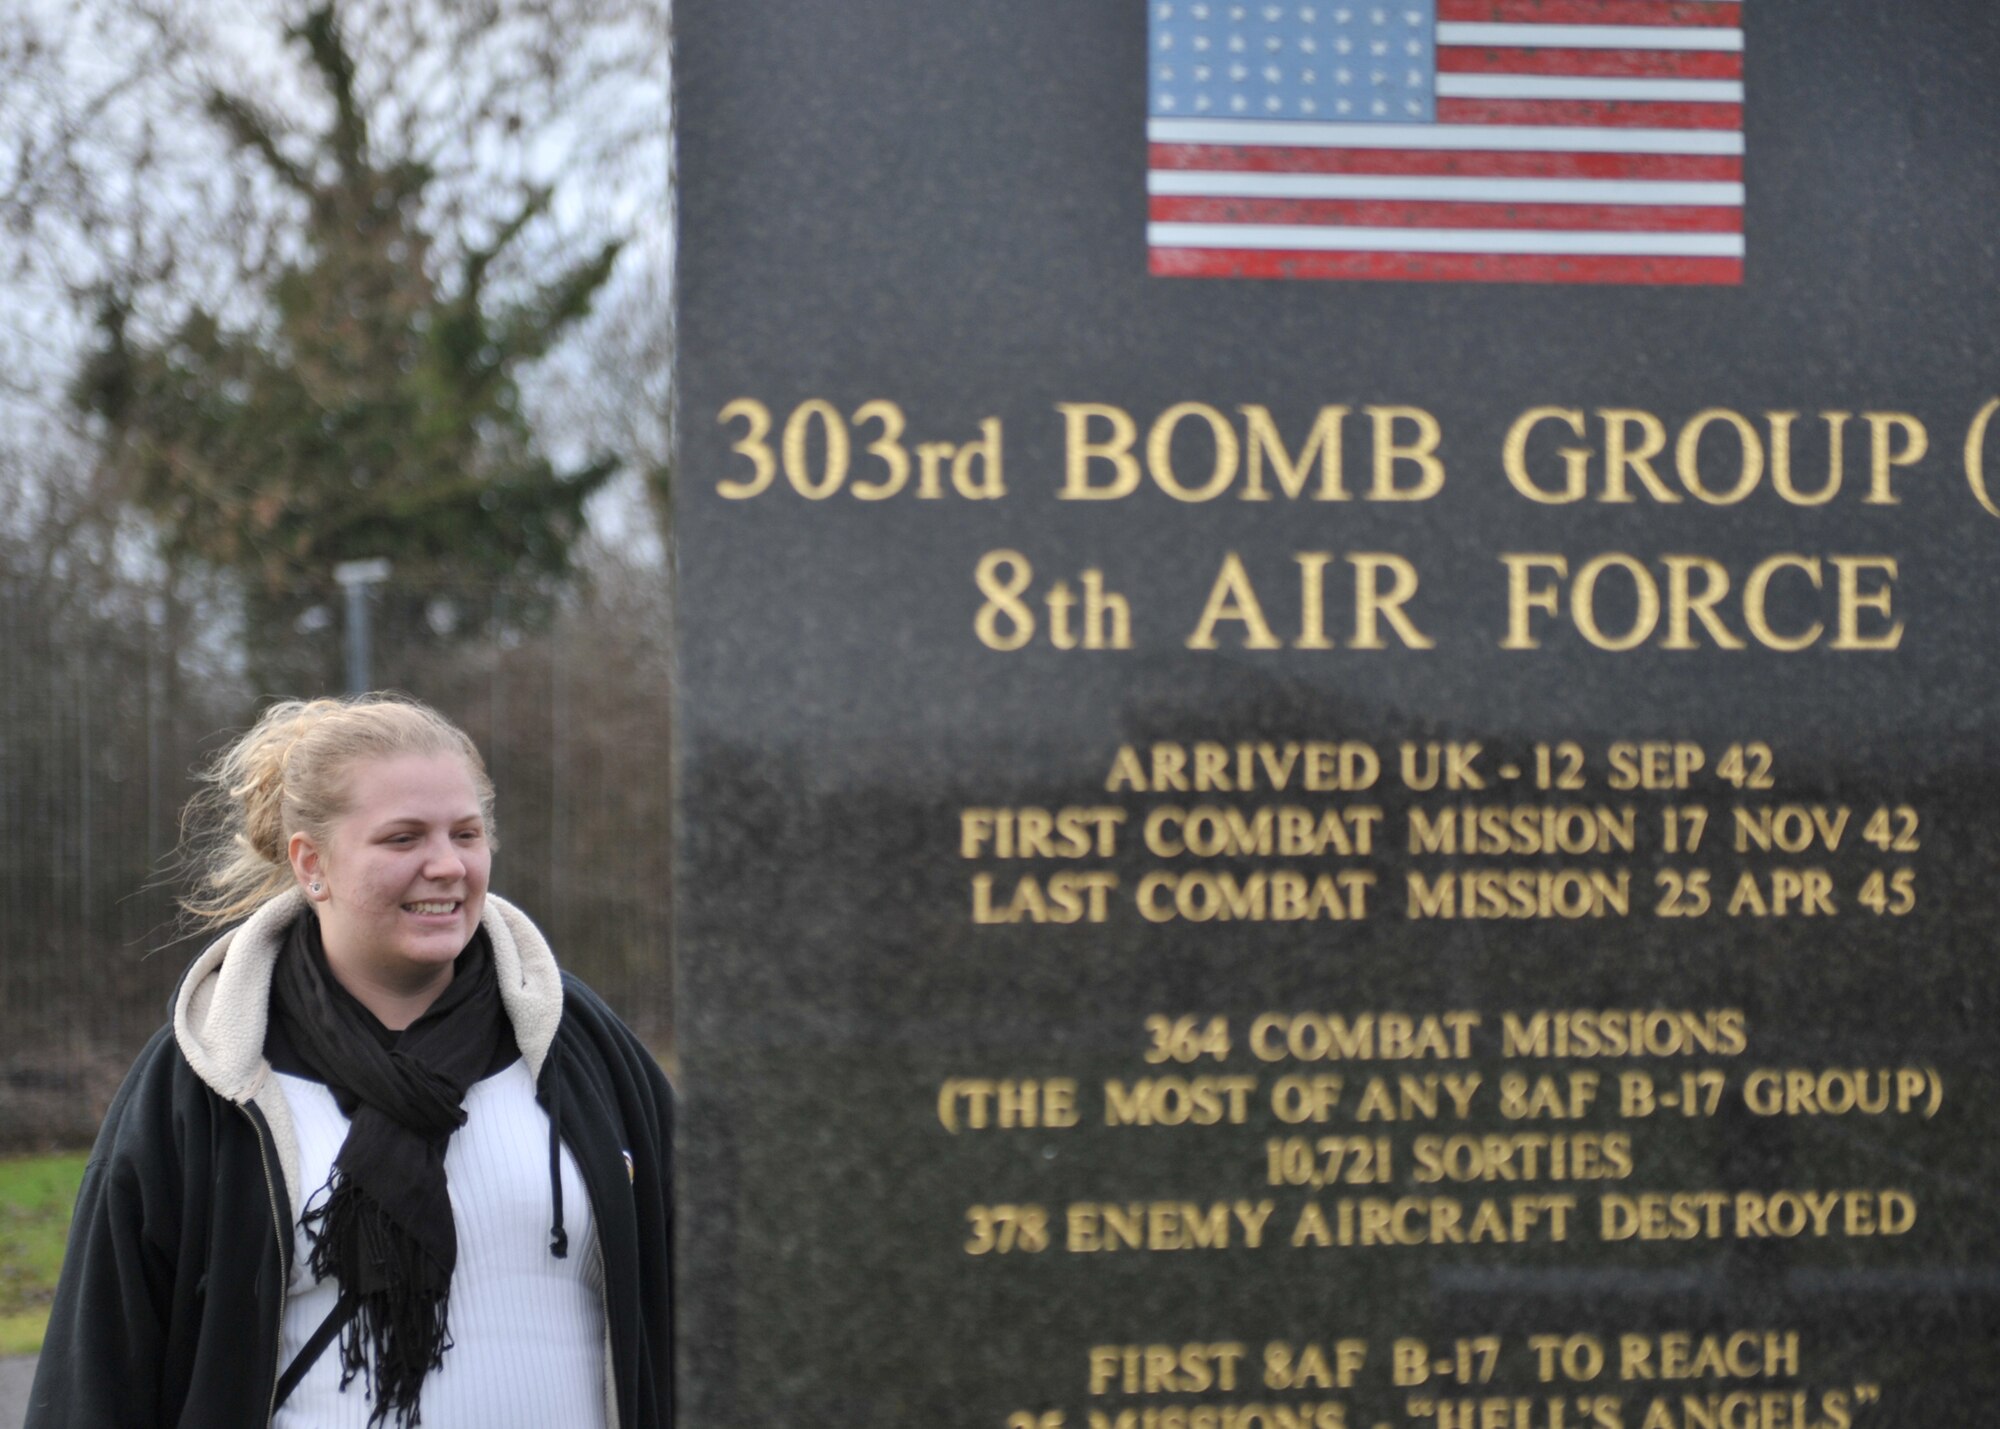 Ms. Teddi Gobrecht stands at the 303rd Bomb Group (Heavy) Memorial at RAF Molesworth.  Ms. Gobrecht visited the base where her grandfather Lt Col Harry Gobreacht flew B-17s during the Second World War on Janaury 25, 2011. (U.S. Air Force photo by Staff Sgt. Javier Cruz)